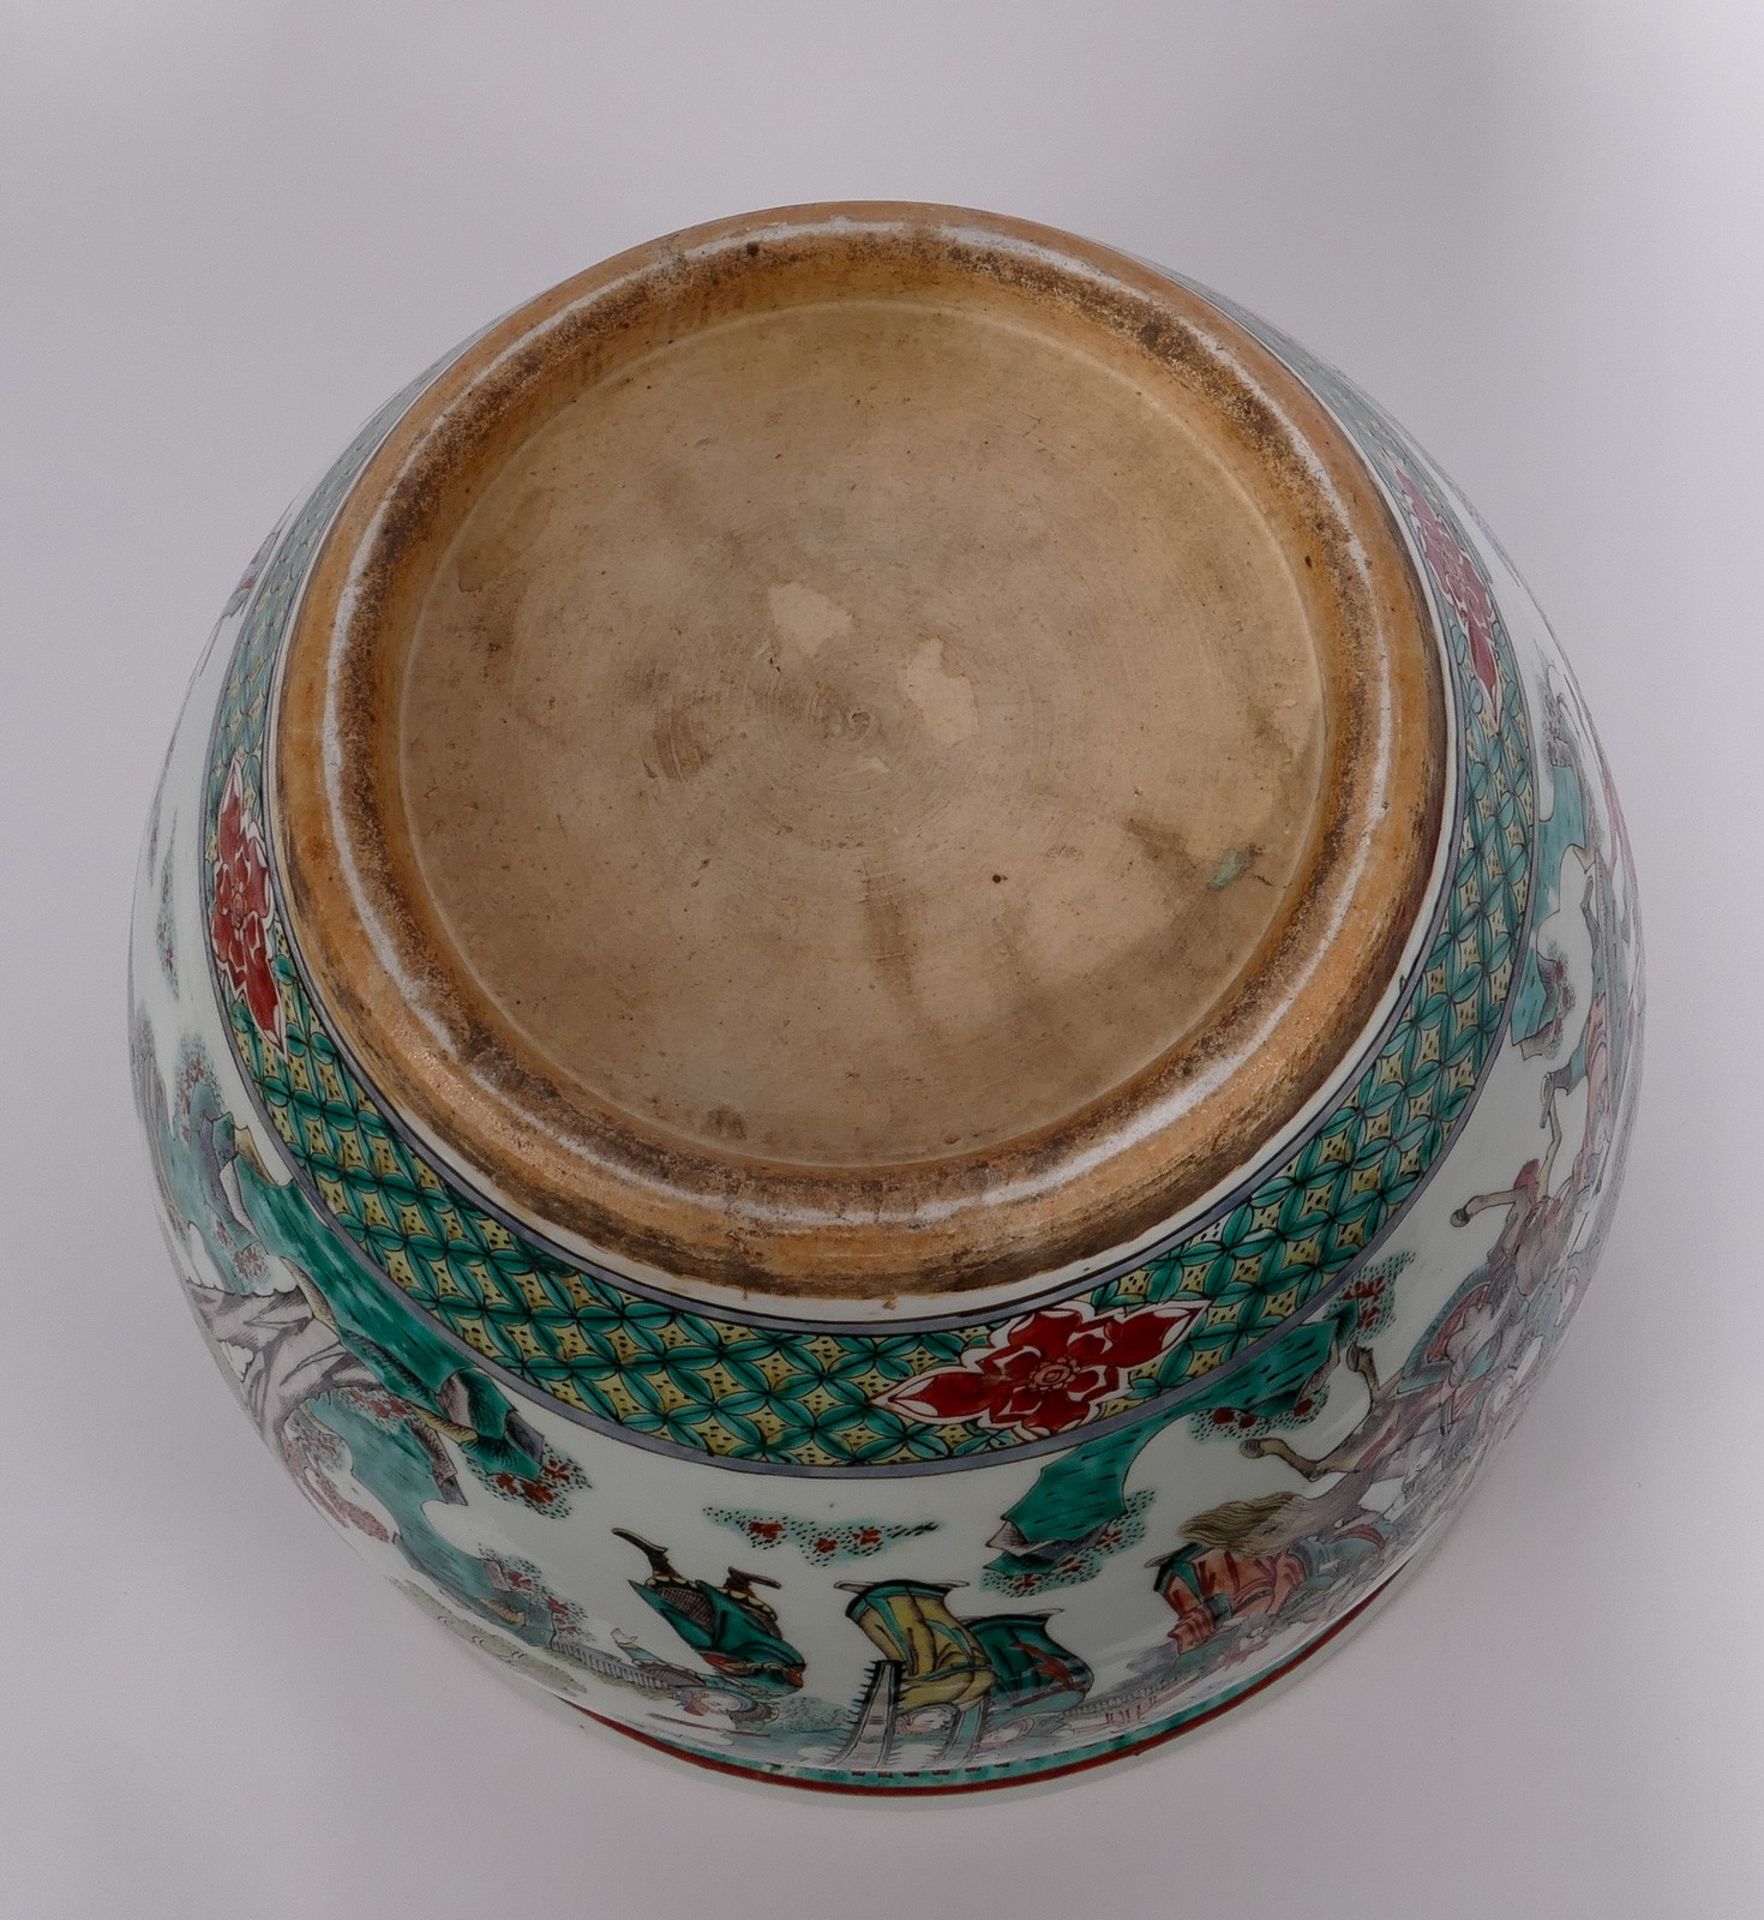 A Chinese famille verte fish bowl, decorated with a court scene and warriors, H 35,5 - Diameter 41 - Bild 7 aus 8